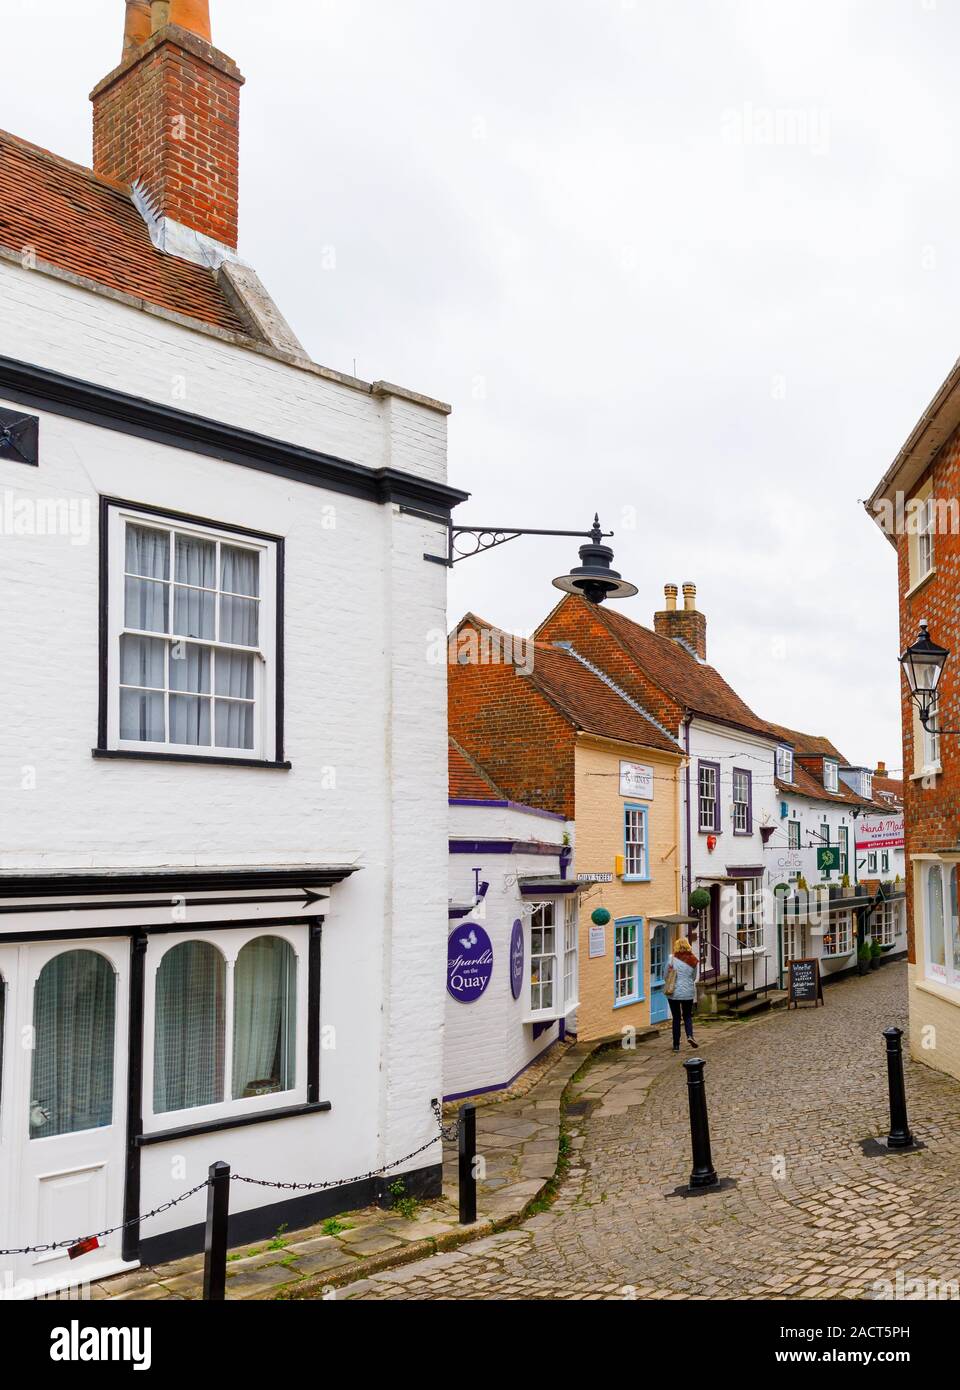 View of quaint historic buildings in Quay Street, old Lymington, a market town in the New Forest District of Hampshire, southern England, UK Stock Photo